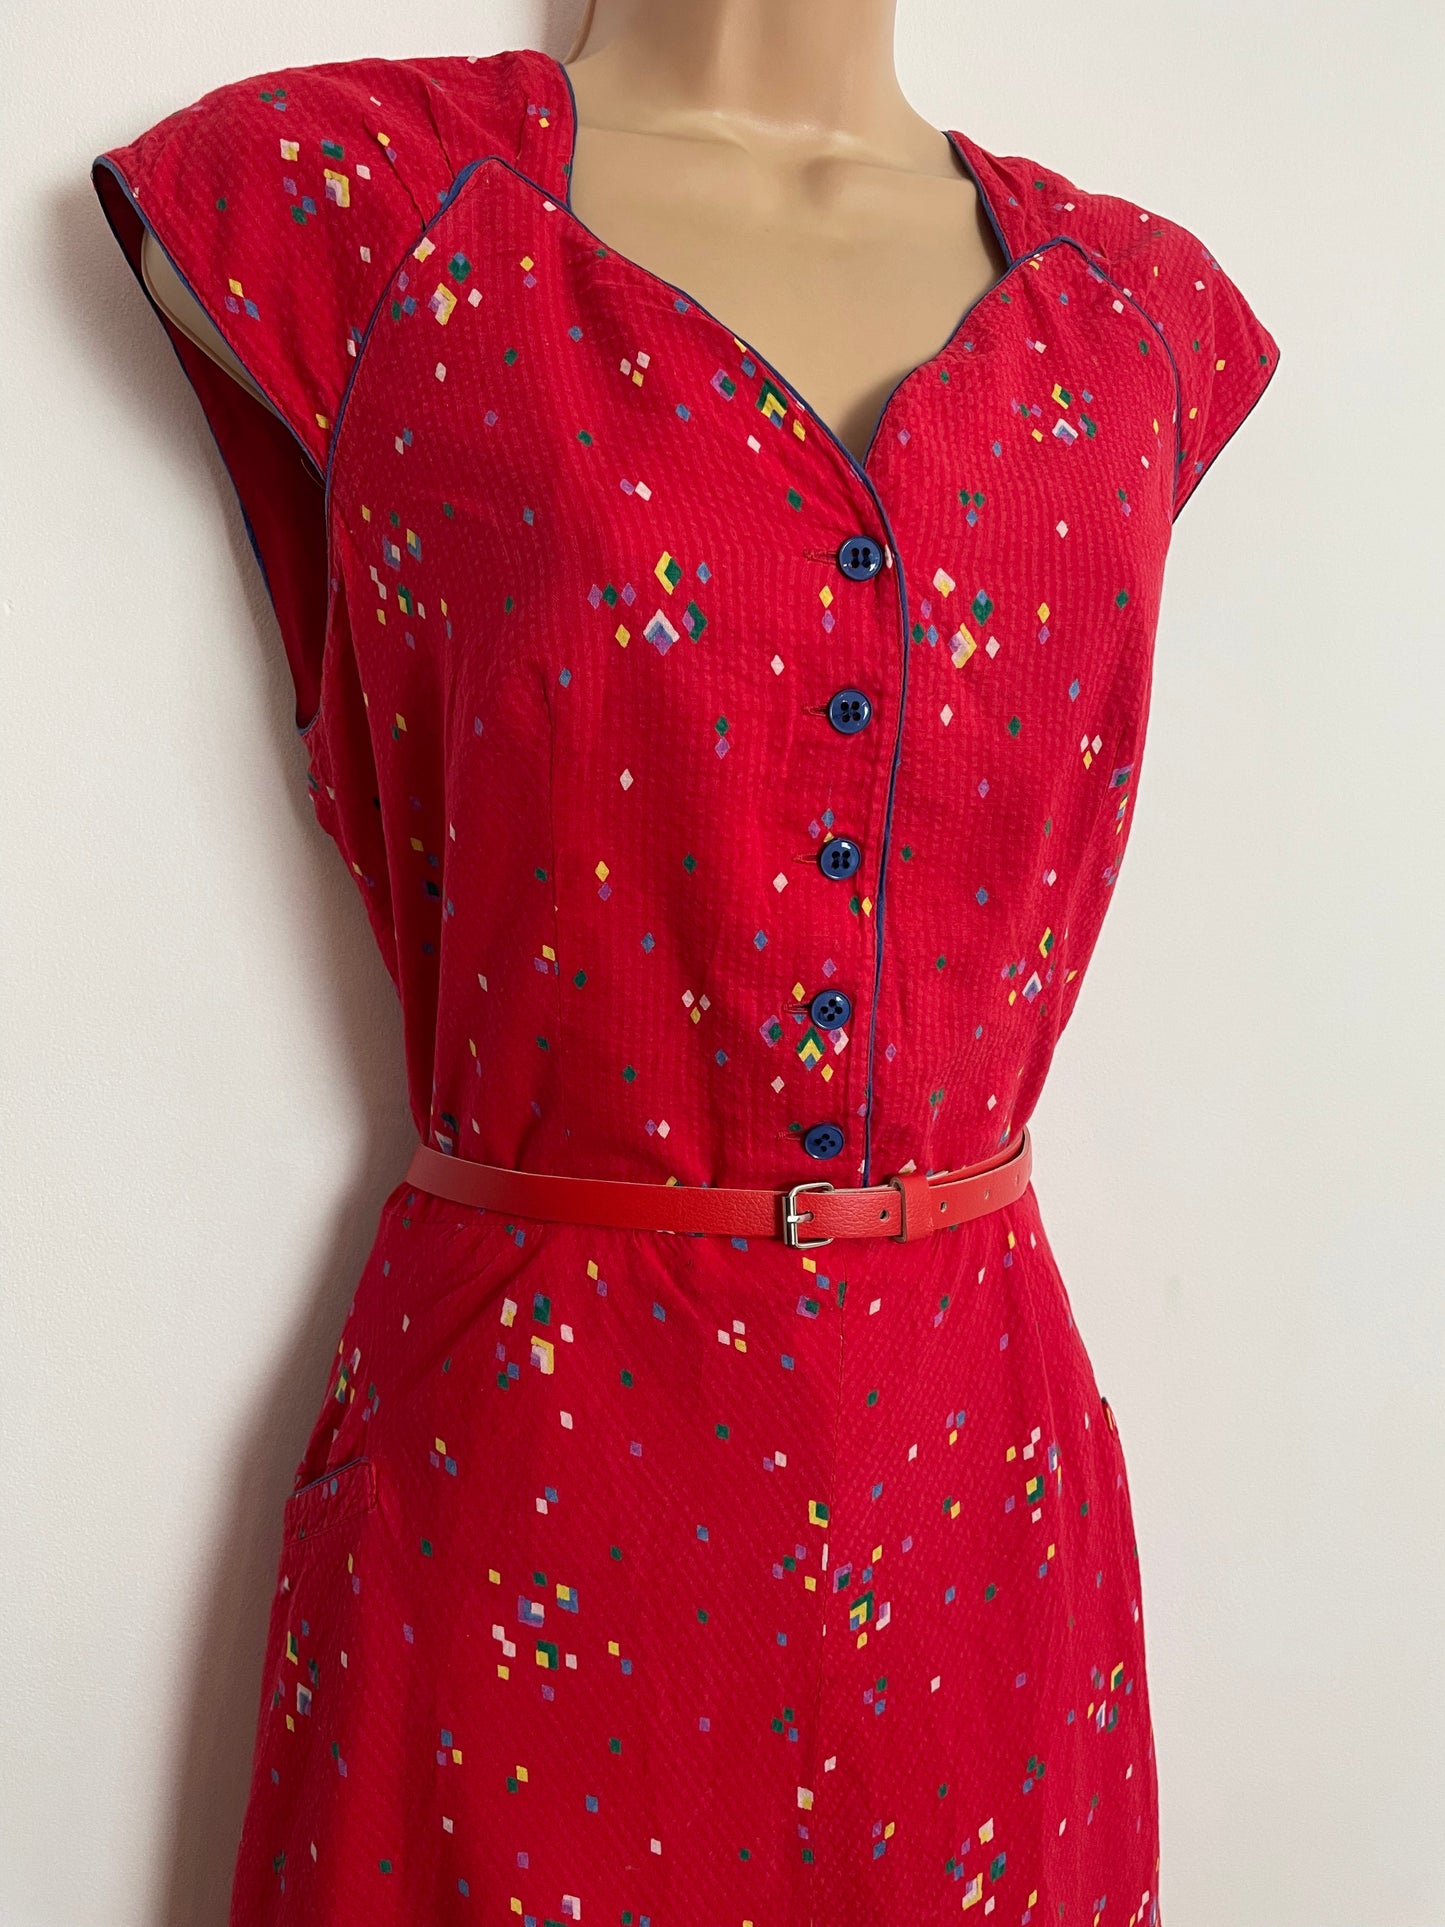 Vintage Early 1980s BETTY BARCLAY UK Size 12 Red Diamond Print Cotton Belted Cap Sleeve Day Dress